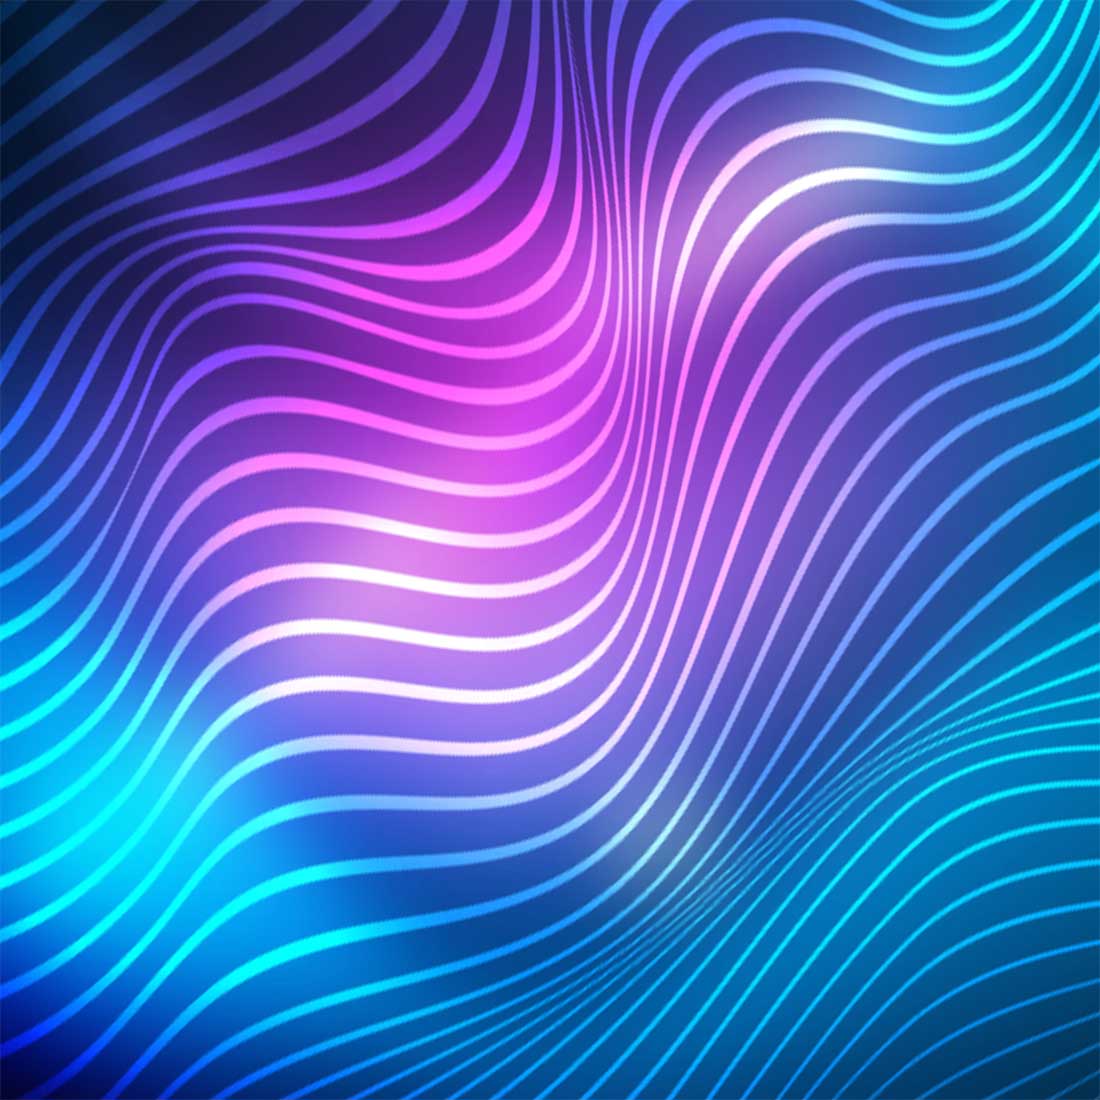 Abstract Wave Background Gradient Defocused Luxury Vivid Blurred Colorful Texture Wallpaper cover.